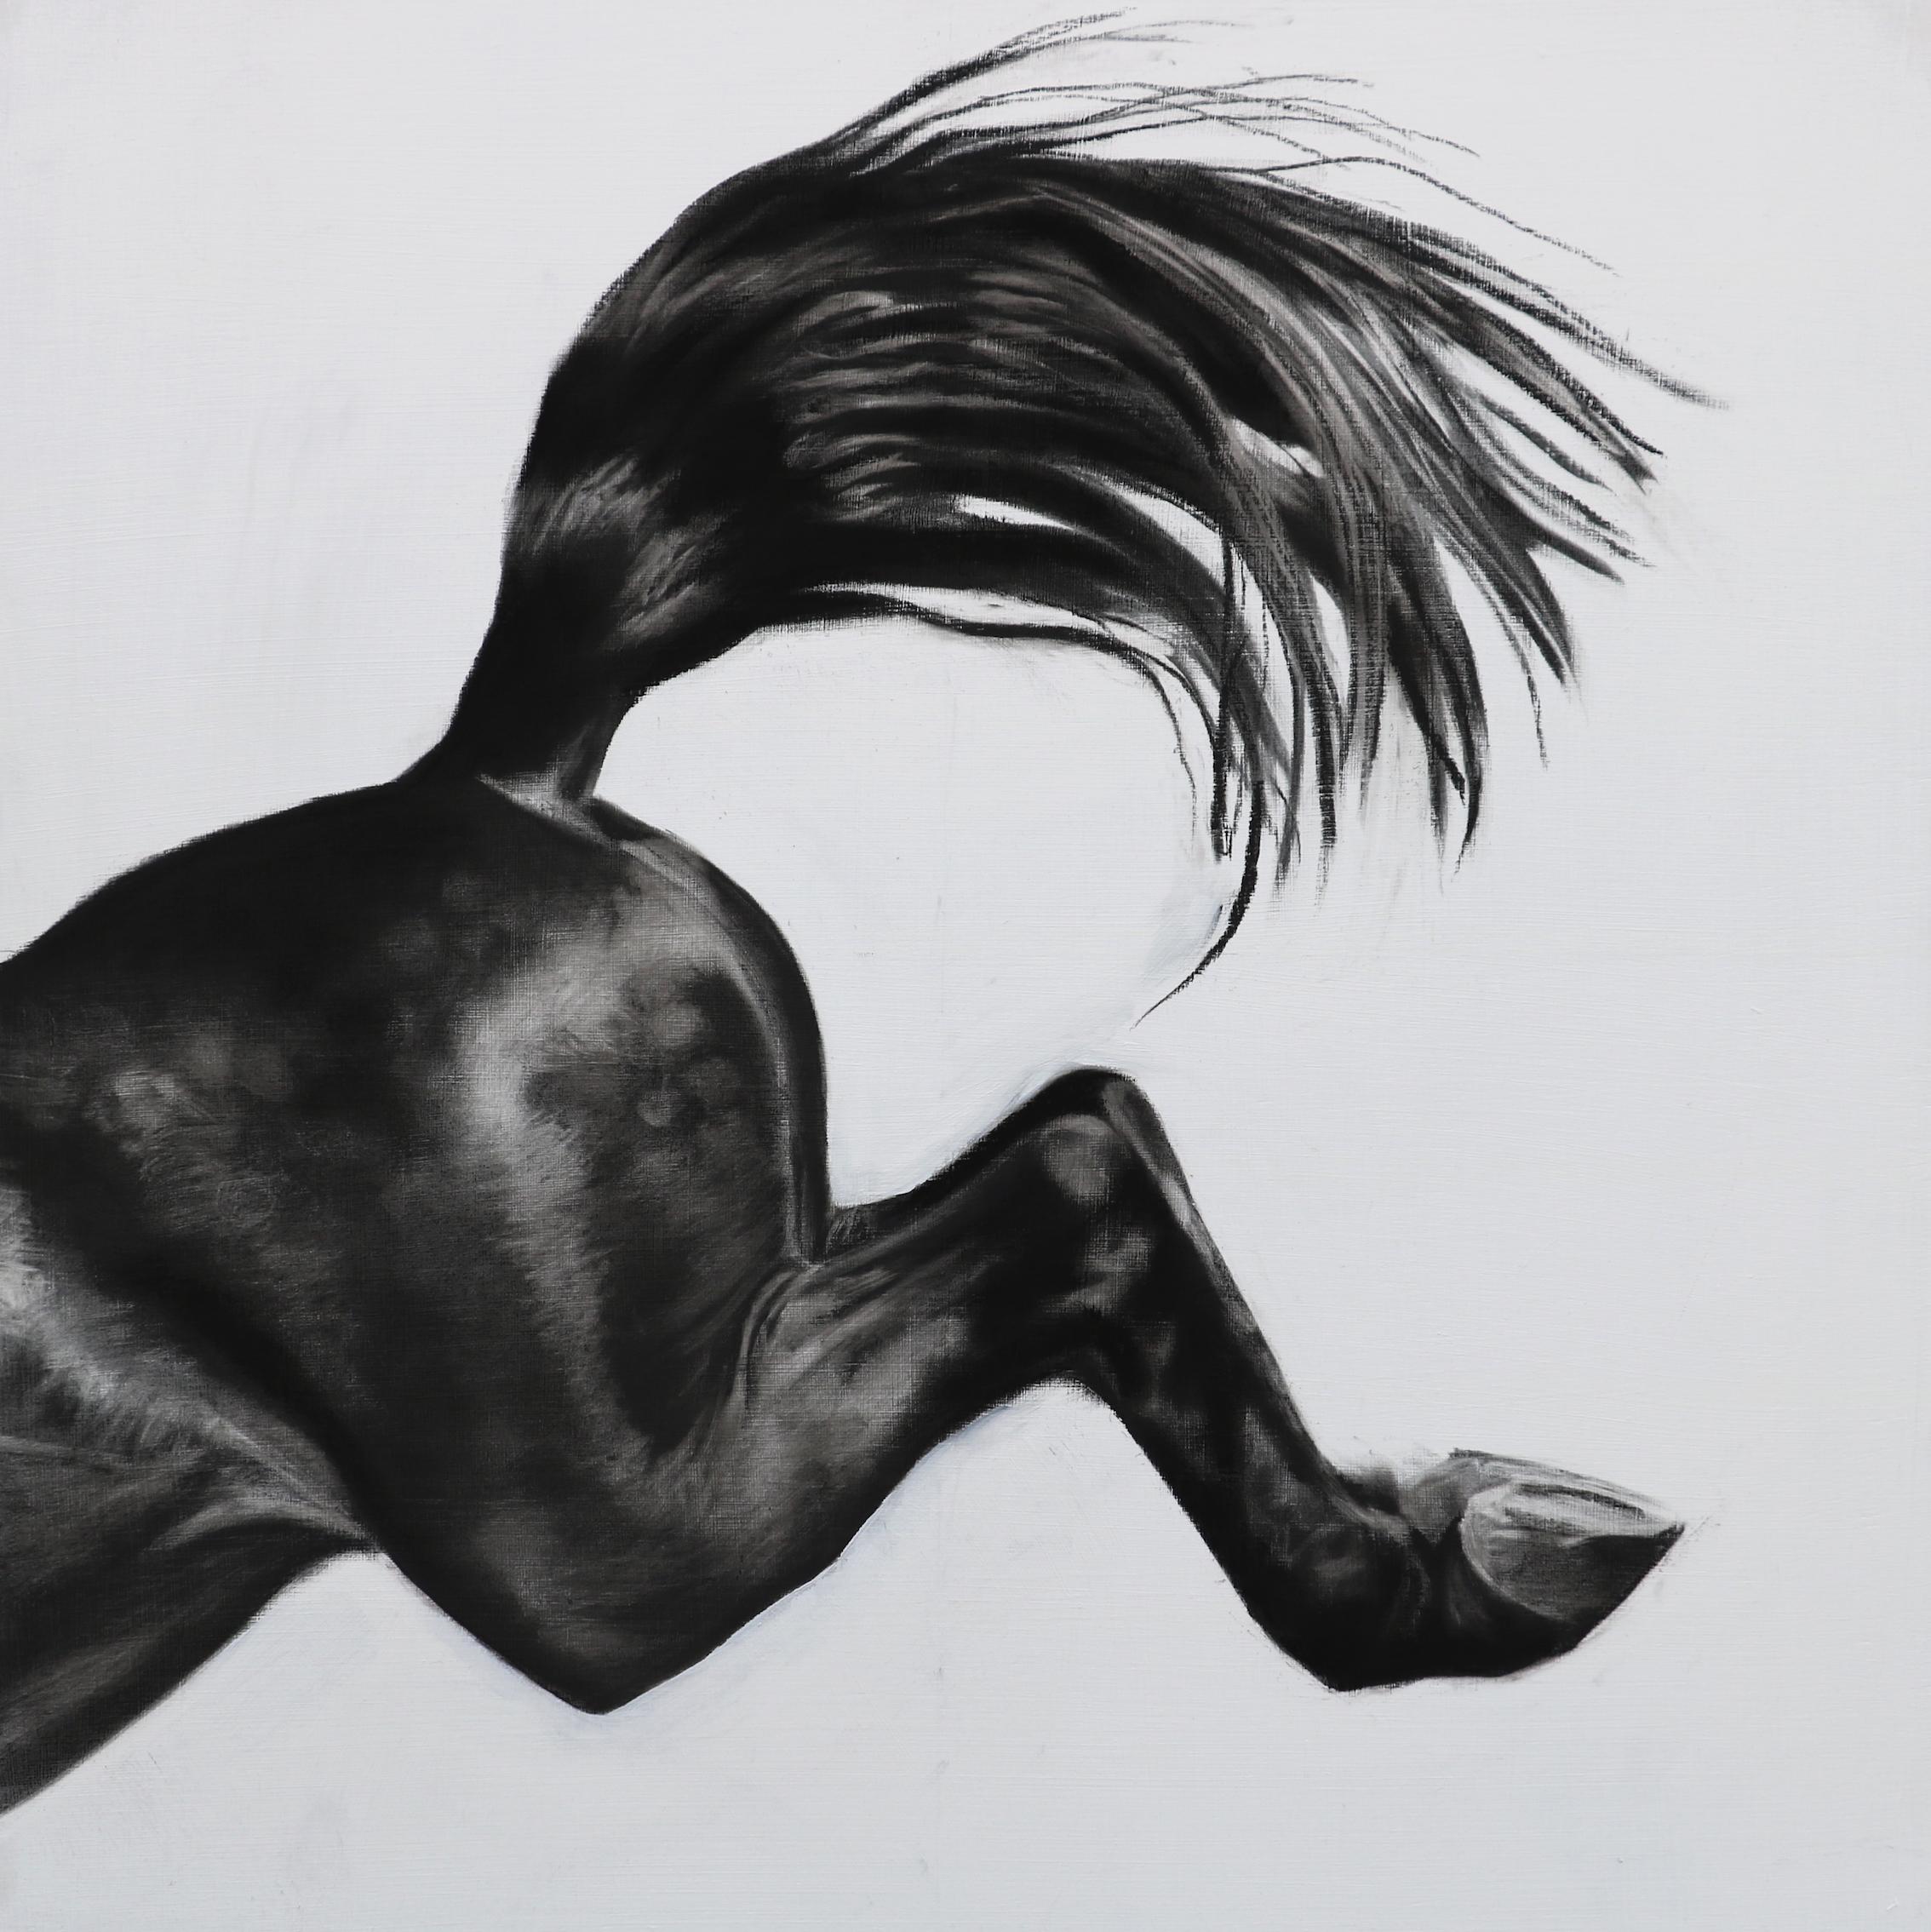 Over the Edge, Horse art by Patsy McArthur, Charcoal, gesso and acrylic on wood